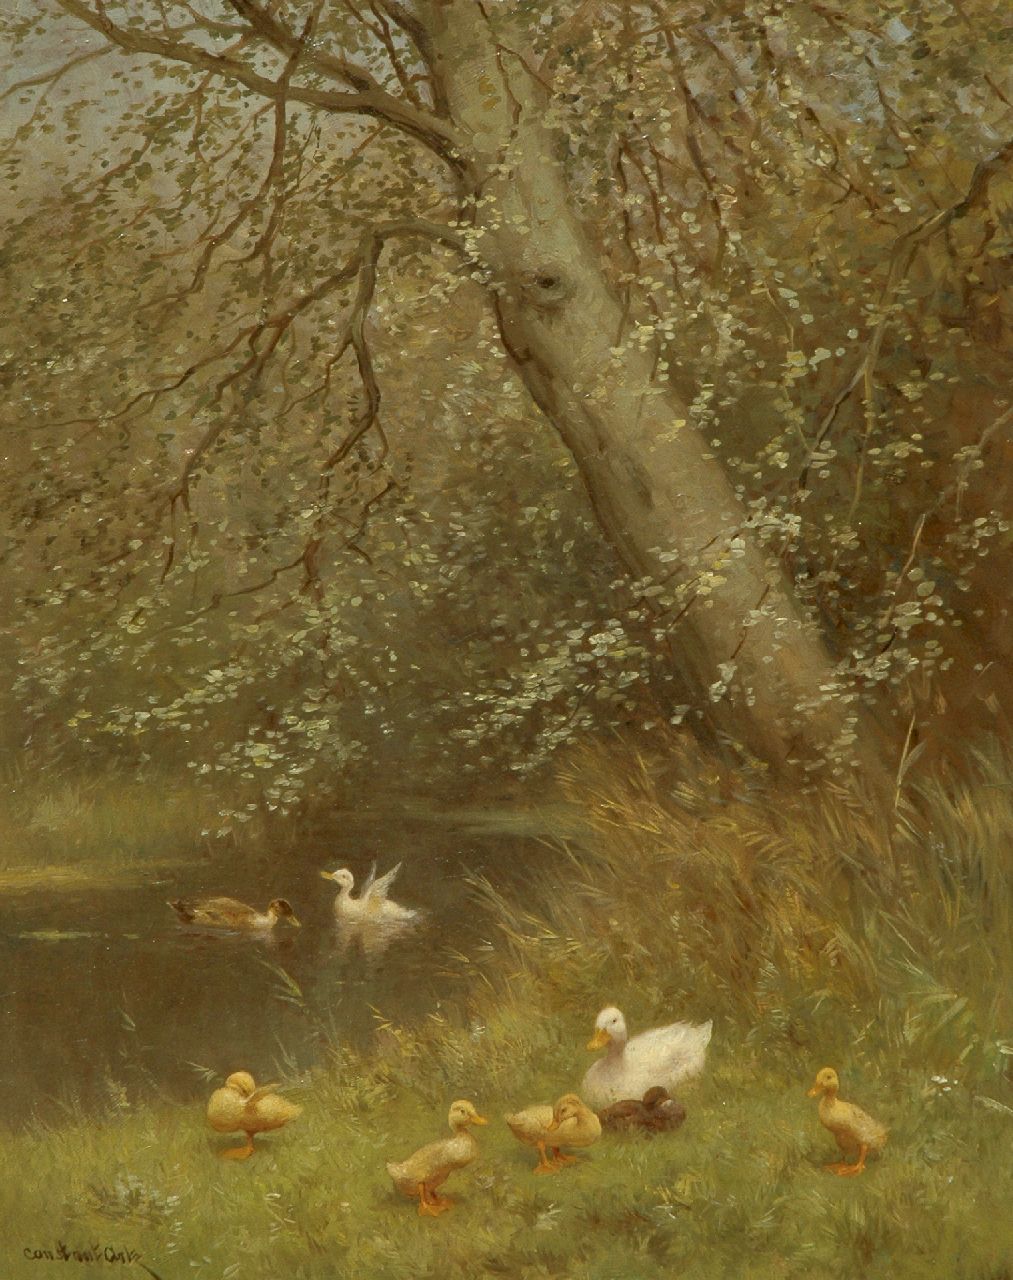 Artz C.D.L.  | 'Constant' David Ludovic Artz | Paintings offered for sale | A family of ducks near a pond, oil on panel 50.1 x 40.2 cm, signed l.l.